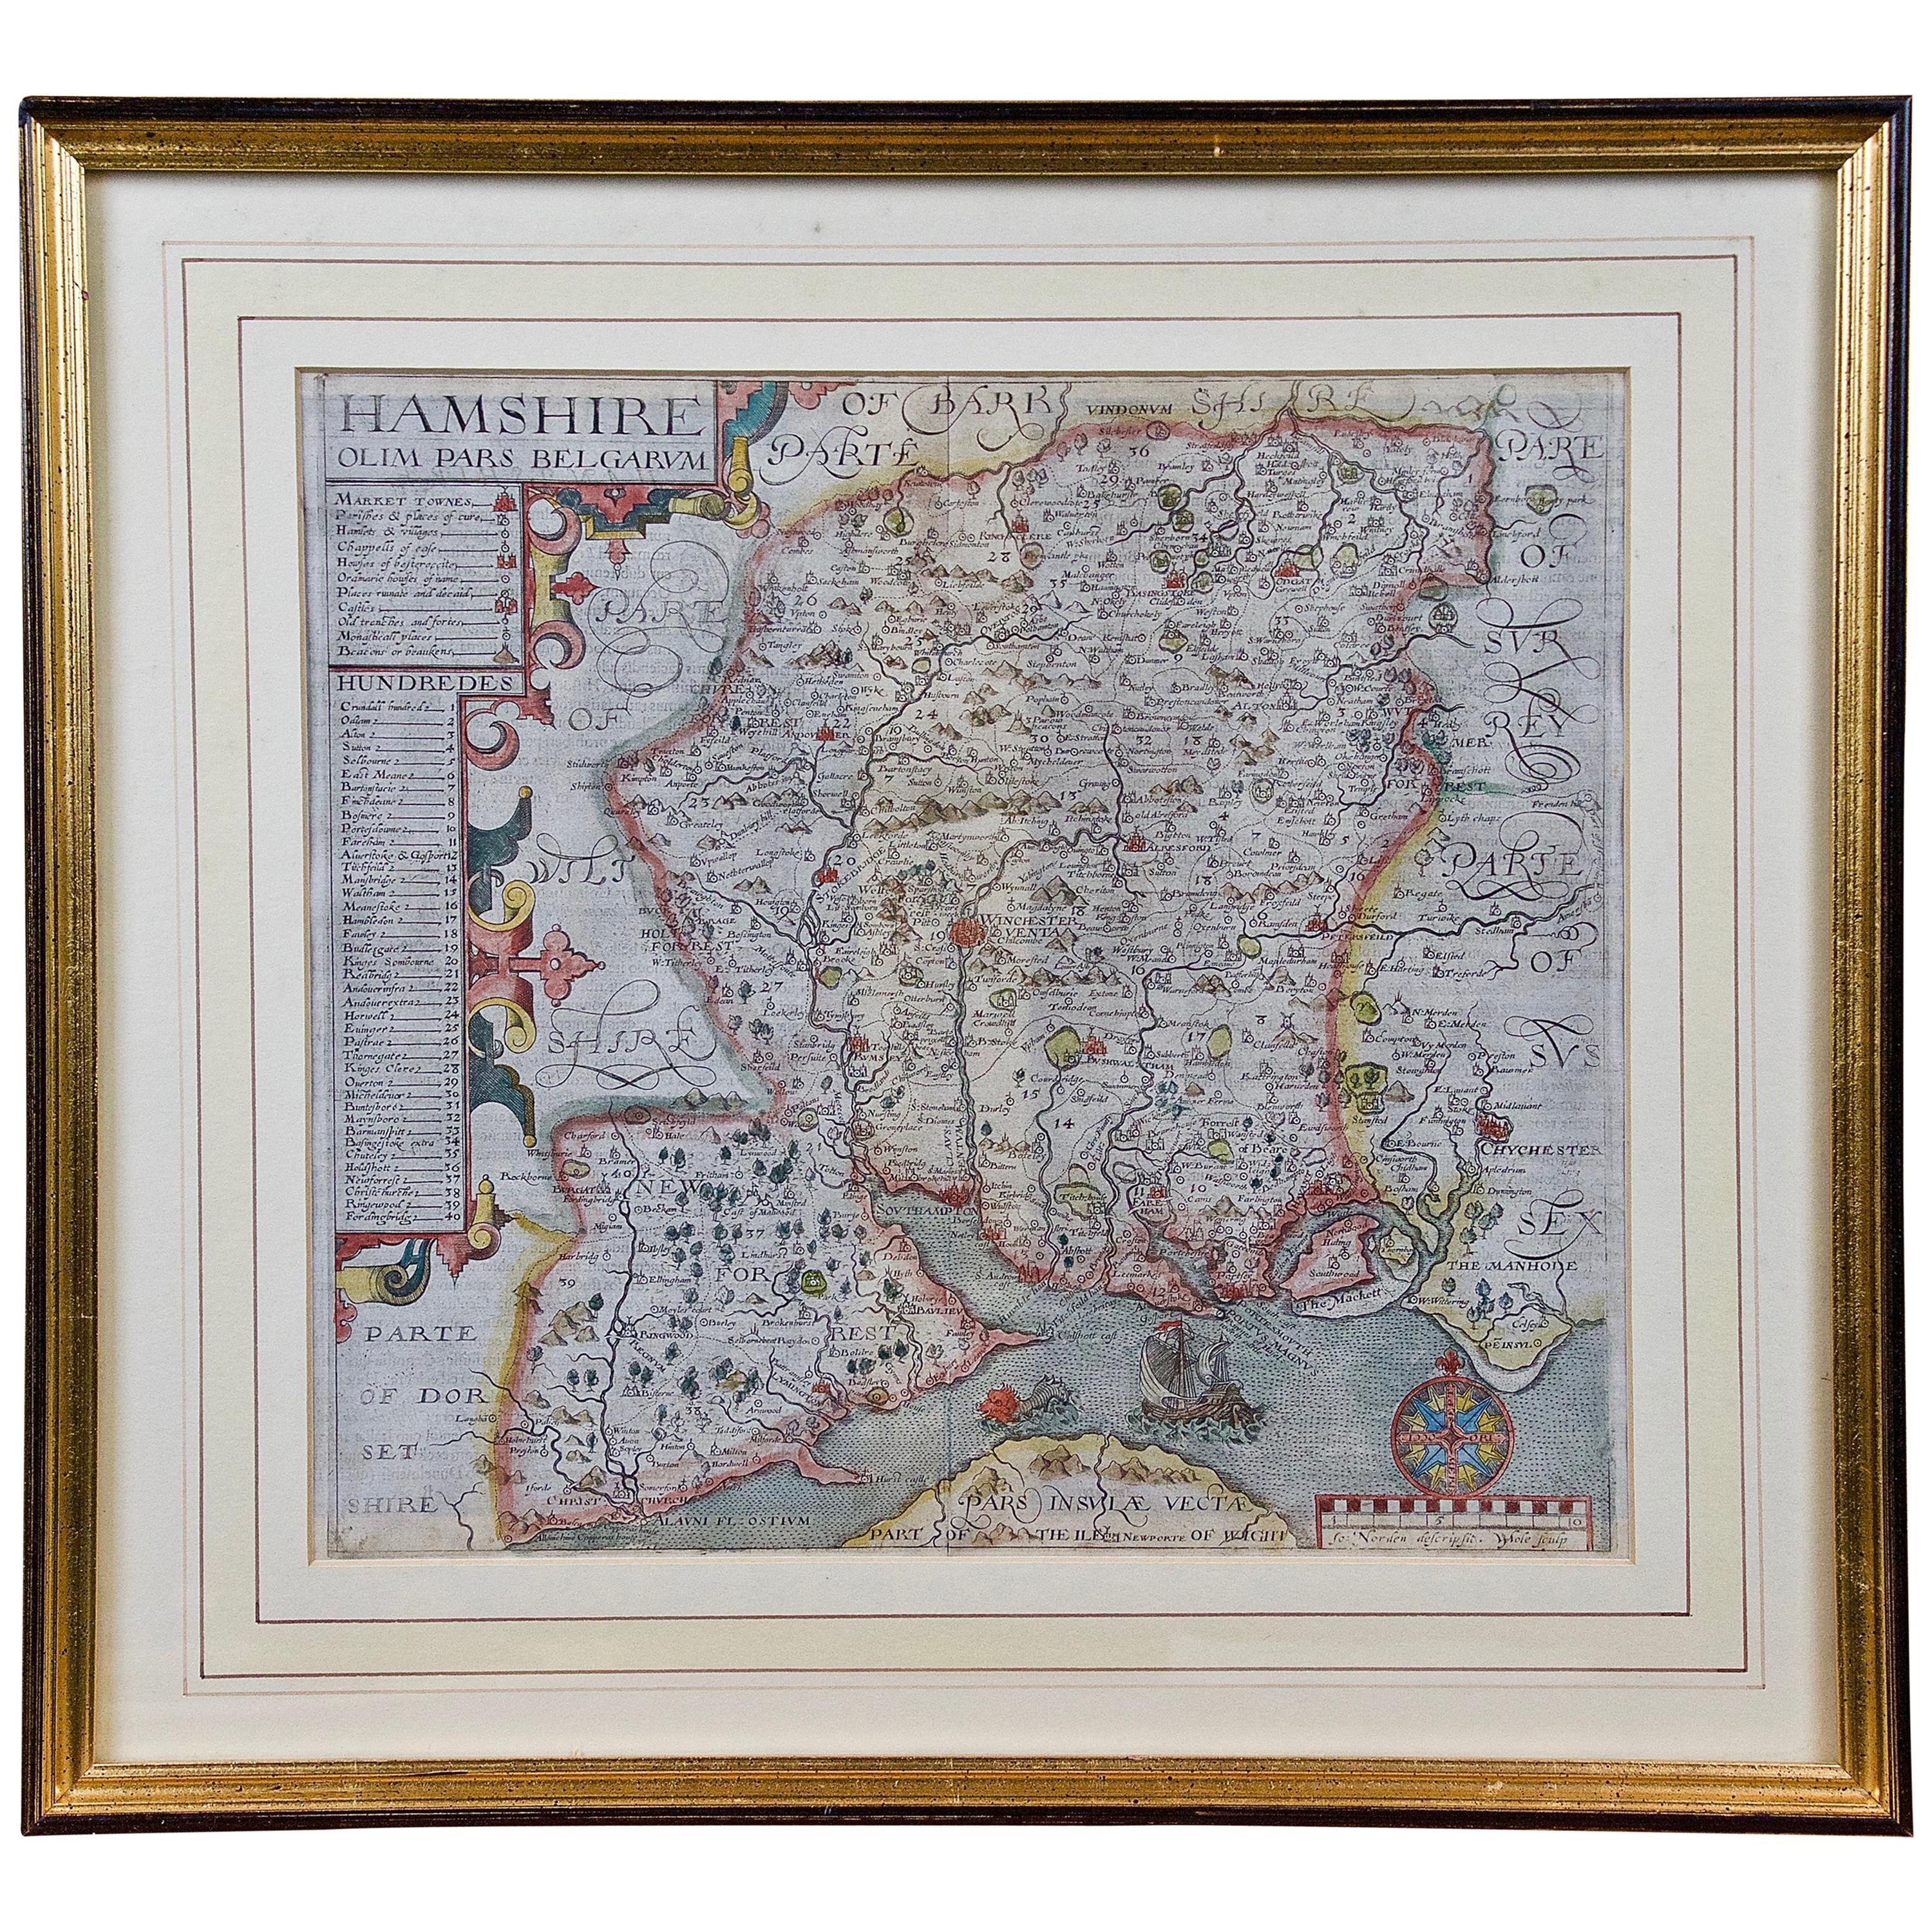 Hampshire County, Britain/England: A Map from Camden's" Britannia" in 1607 For Sale